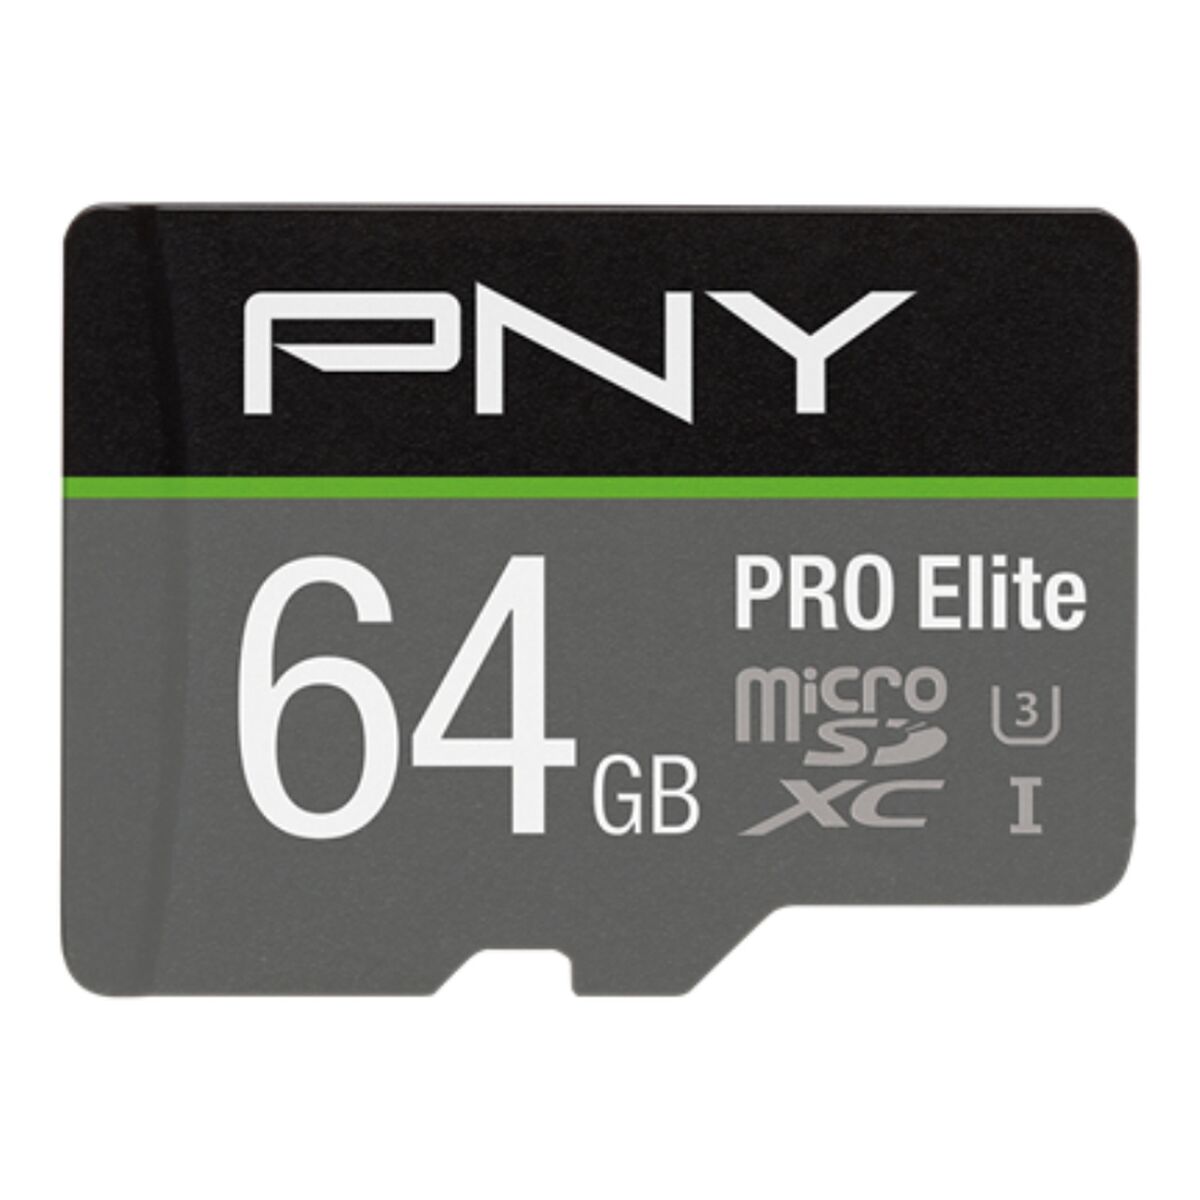 Micro SD Memory Card with Adaptor PNY P-SDU64GV31100PRO-GE Pro Elite C10 64 GB, PNY, Computing, Data storage, micro-sd-memory-card-with-adaptor-pny-p-sdu64gv31100pro-ge-pro-elite-c10-64-gb, Brand_PNY, category-reference-2609, category-reference-2803, category-reference-2813, category-reference-t-19685, category-reference-t-19909, category-reference-t-21355, category-reference-t-25632, category-reference-t-29820, computers / components, Condition_NEW, Price_20 - 50, Teleworking, RiotNook